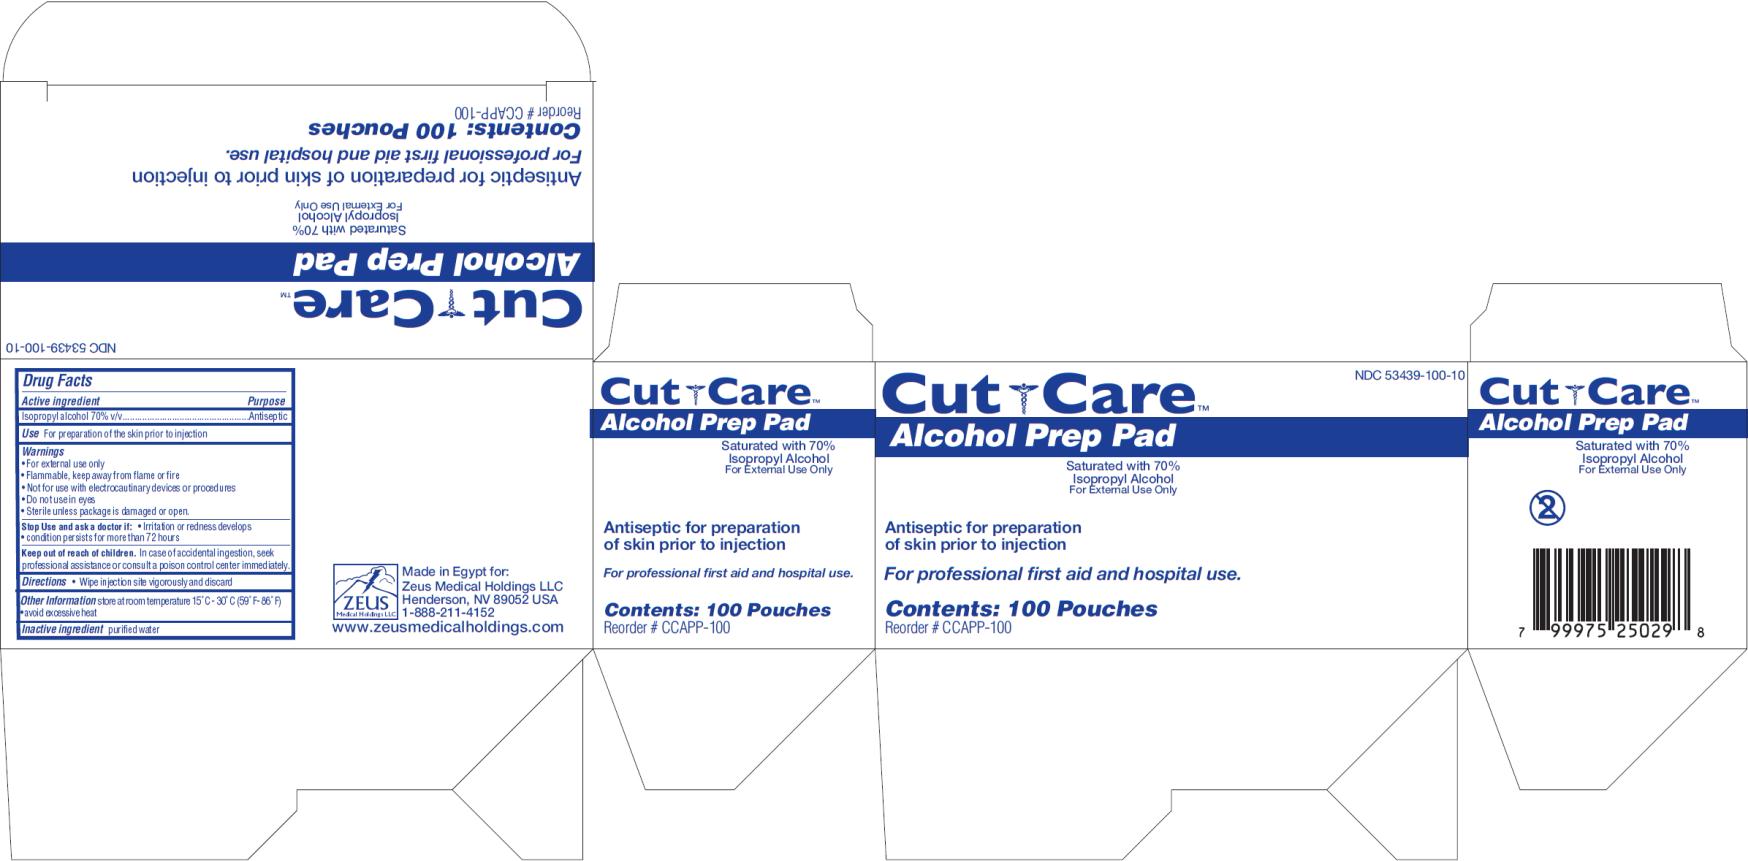 PRINCIPAL DISPLAY PANEL
NDC: <a href=/NDC/53439-100-10>53439-100-10</a>
Cut Care
Alcohol Prep Pad
Saturated with 70% Isopropyl Alcohol
Contents: 100 Pouches